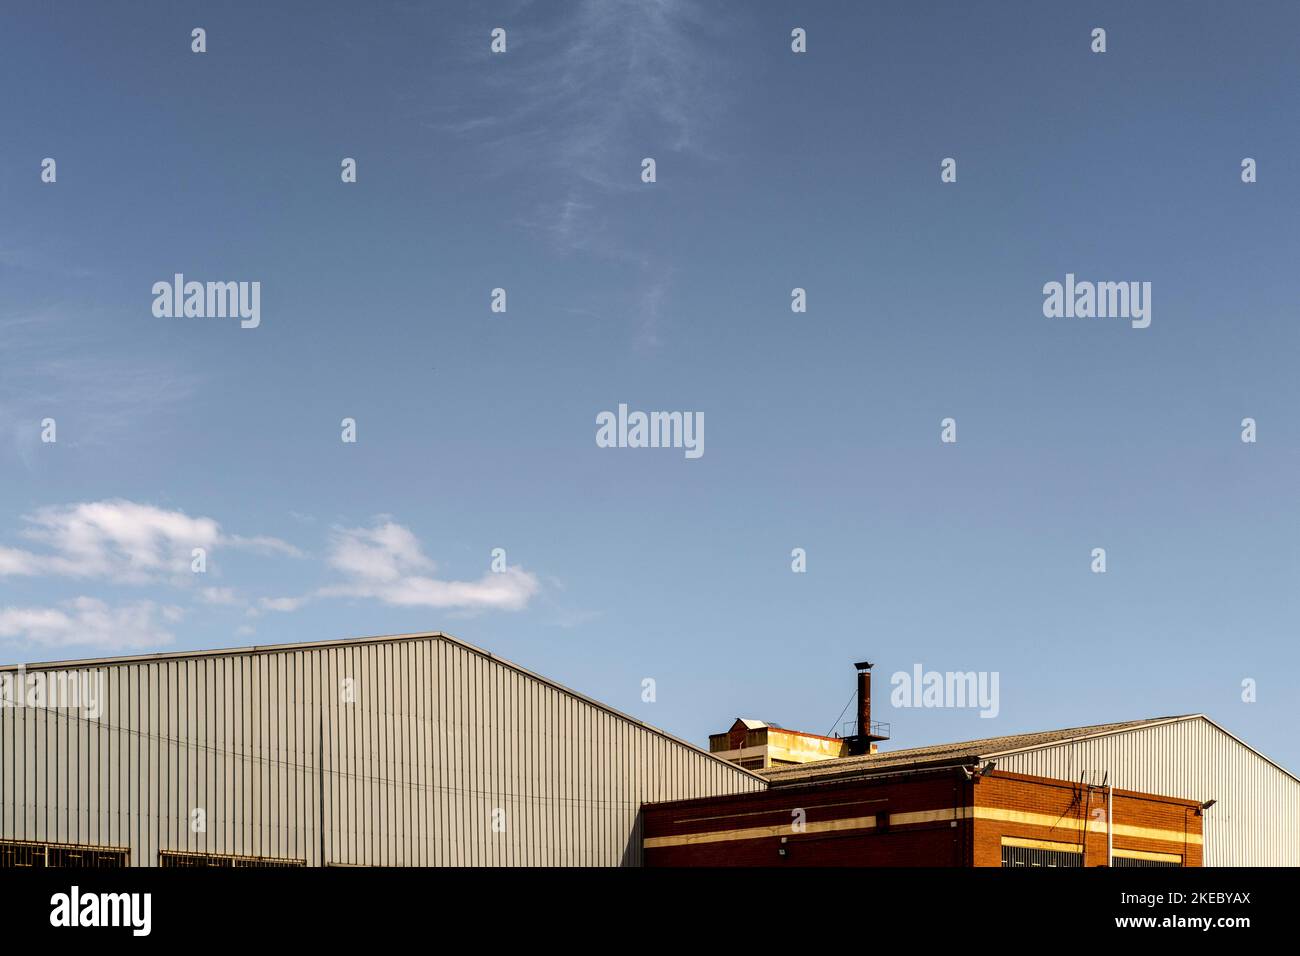 details of a warehouse building in an industrial landscape in a suburb of a European city Stock Photo